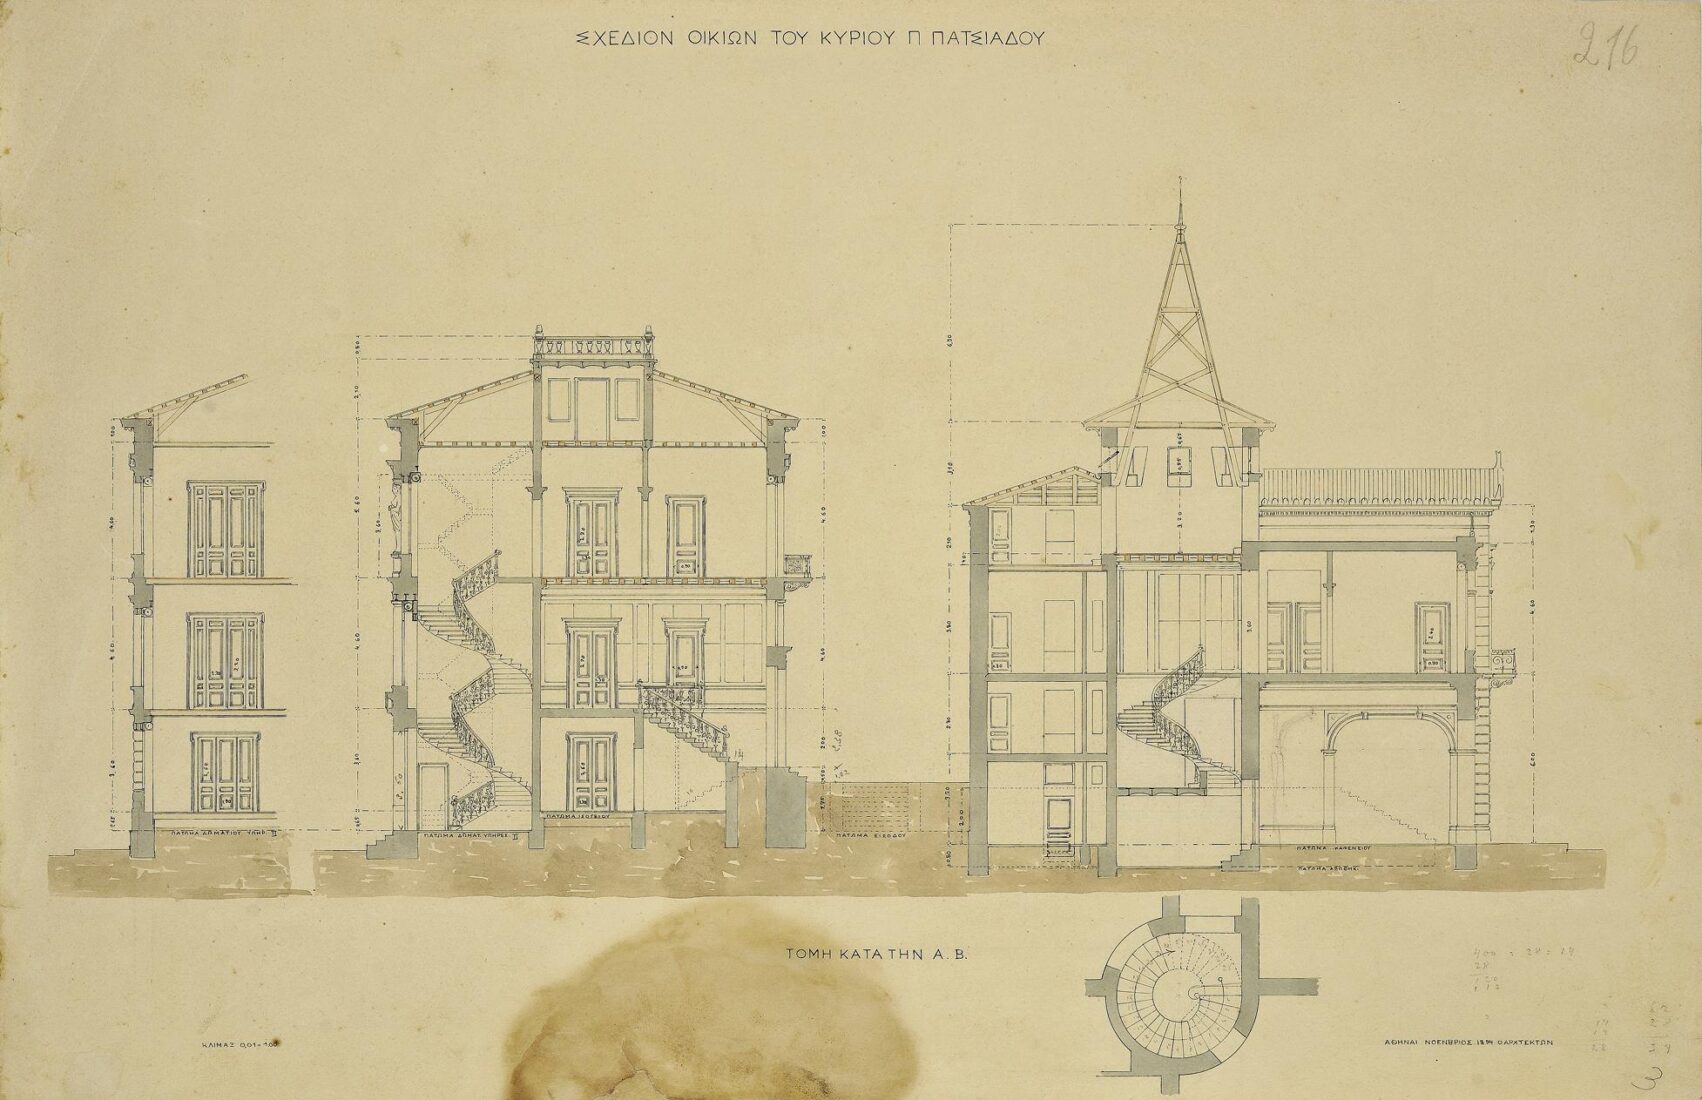 P. Patsiadis Houses, Alexandras Square, Zea. Cross and Longitudinal Sections - Ziller Ernst